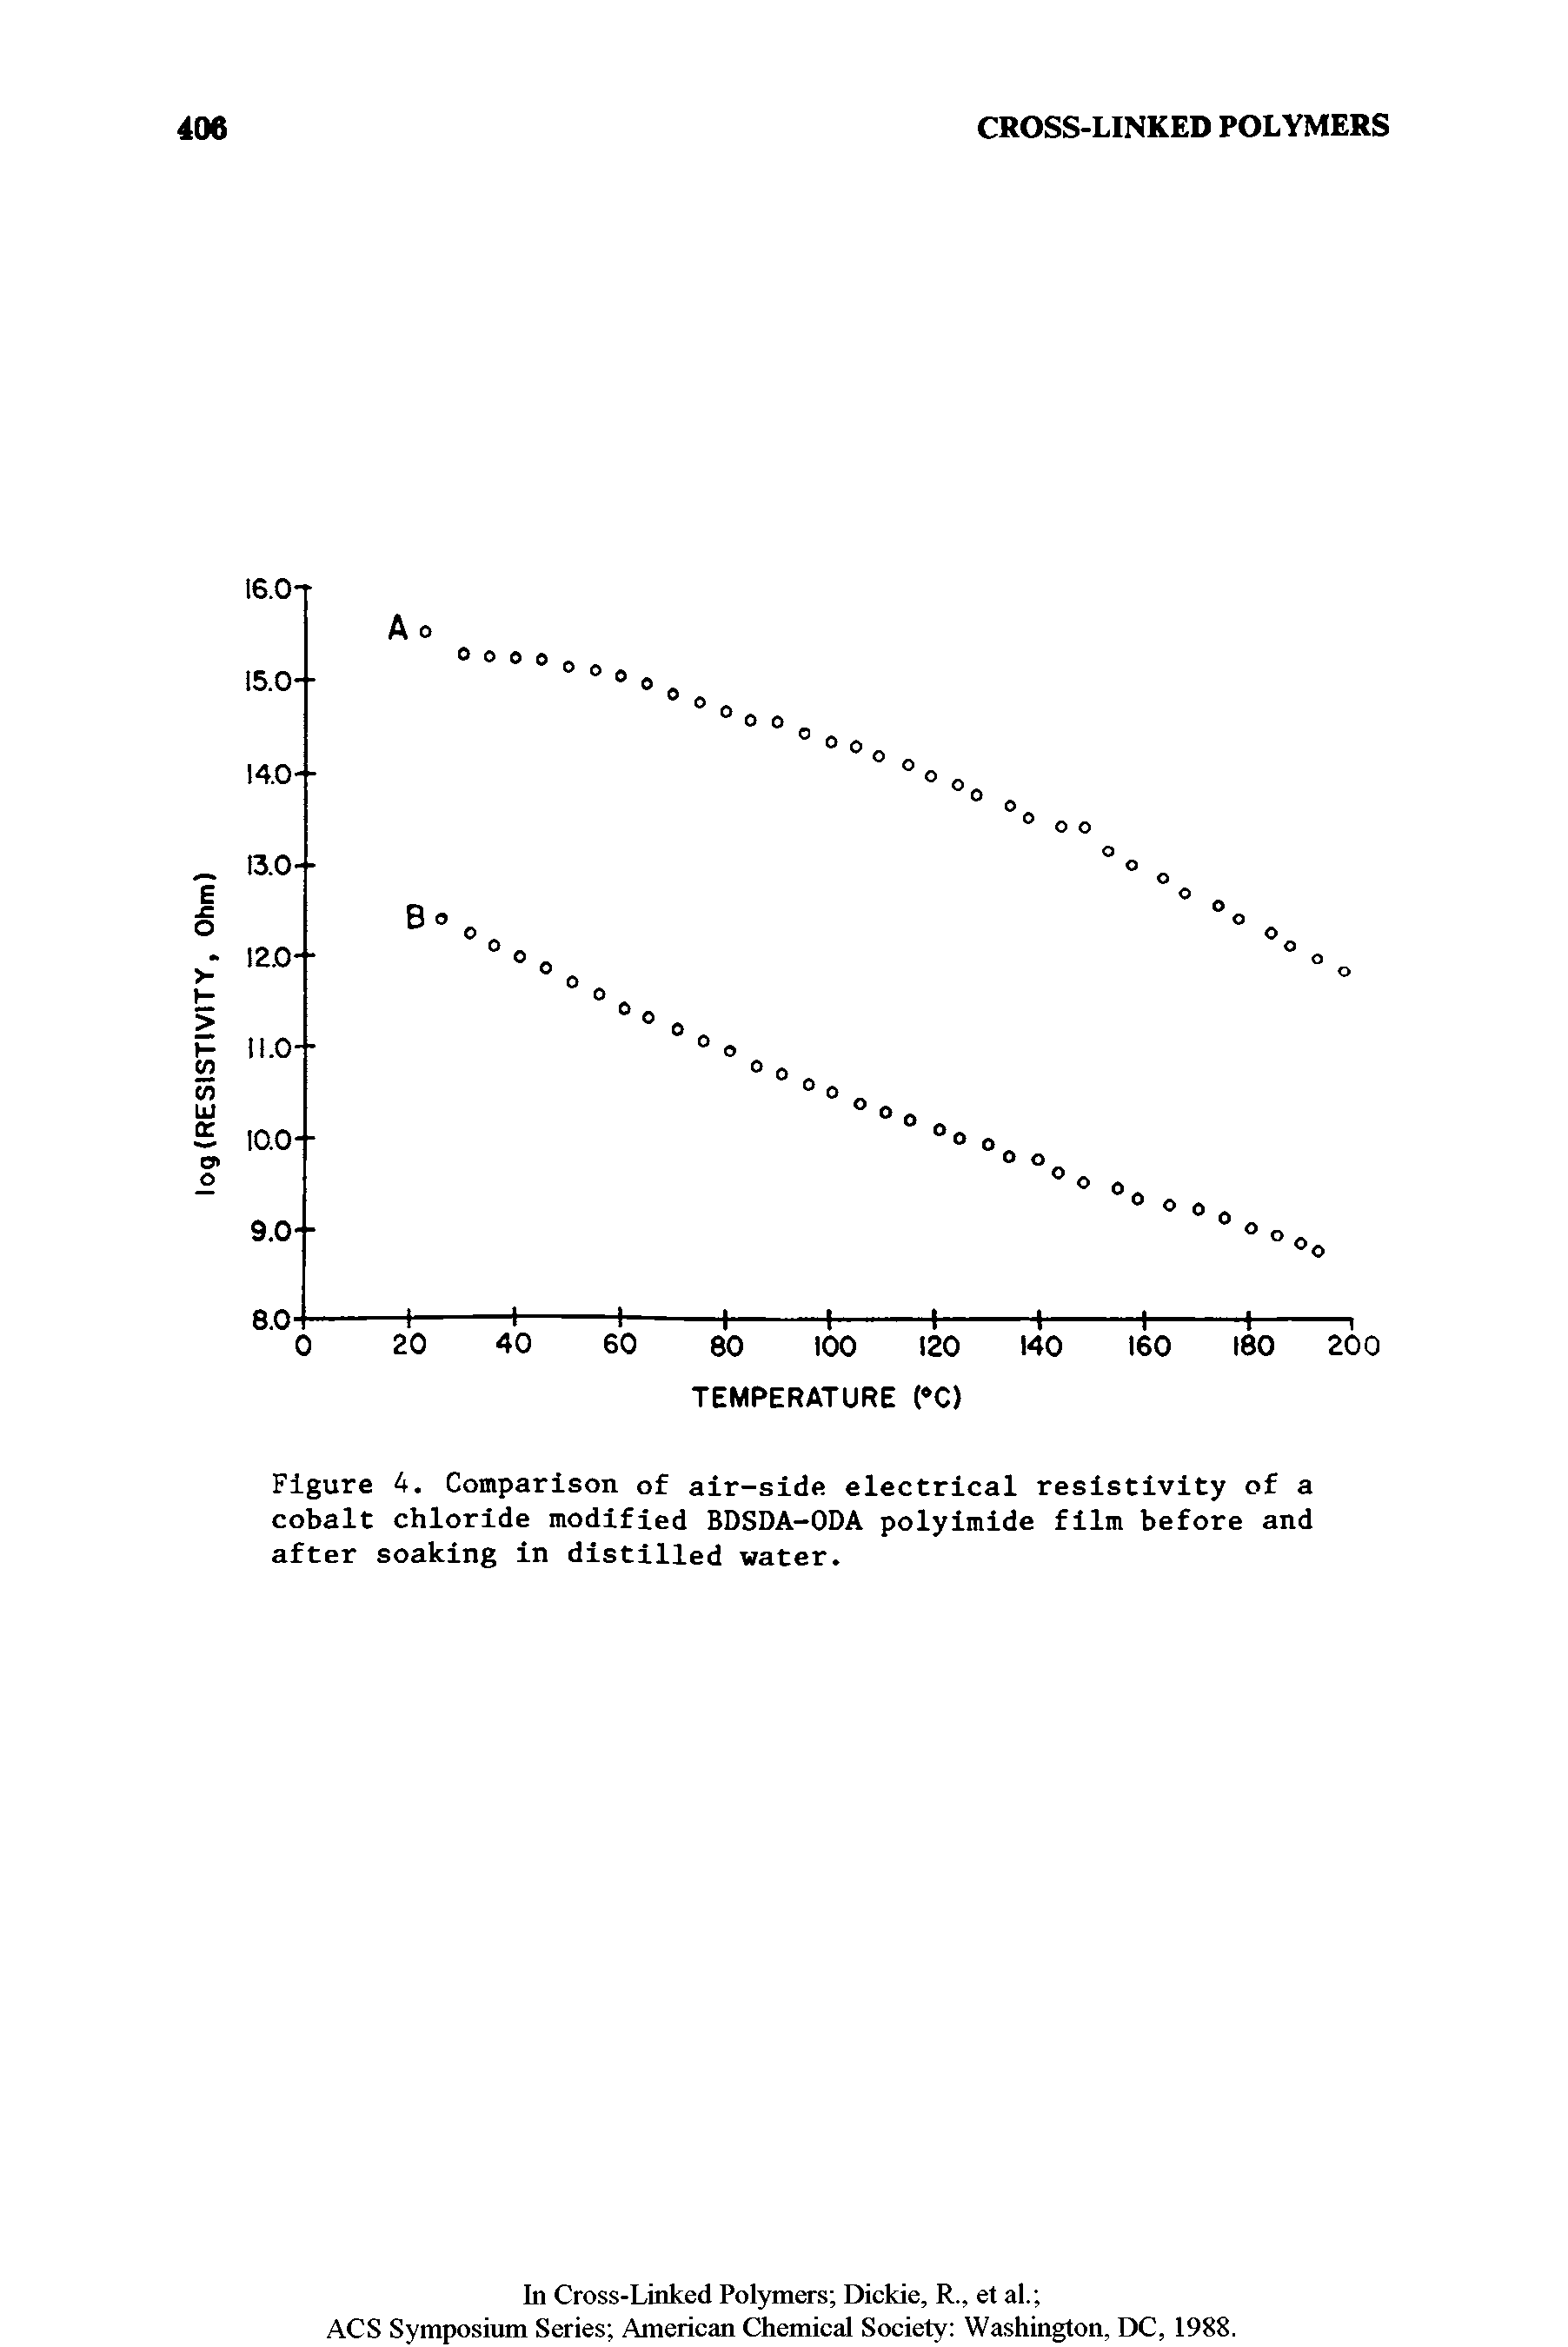 Figure A. Comparison of air-side electrical resistivity of a cobalt chloride modified BDSDA-ODA polyimide film before and after soaking in distilled water.